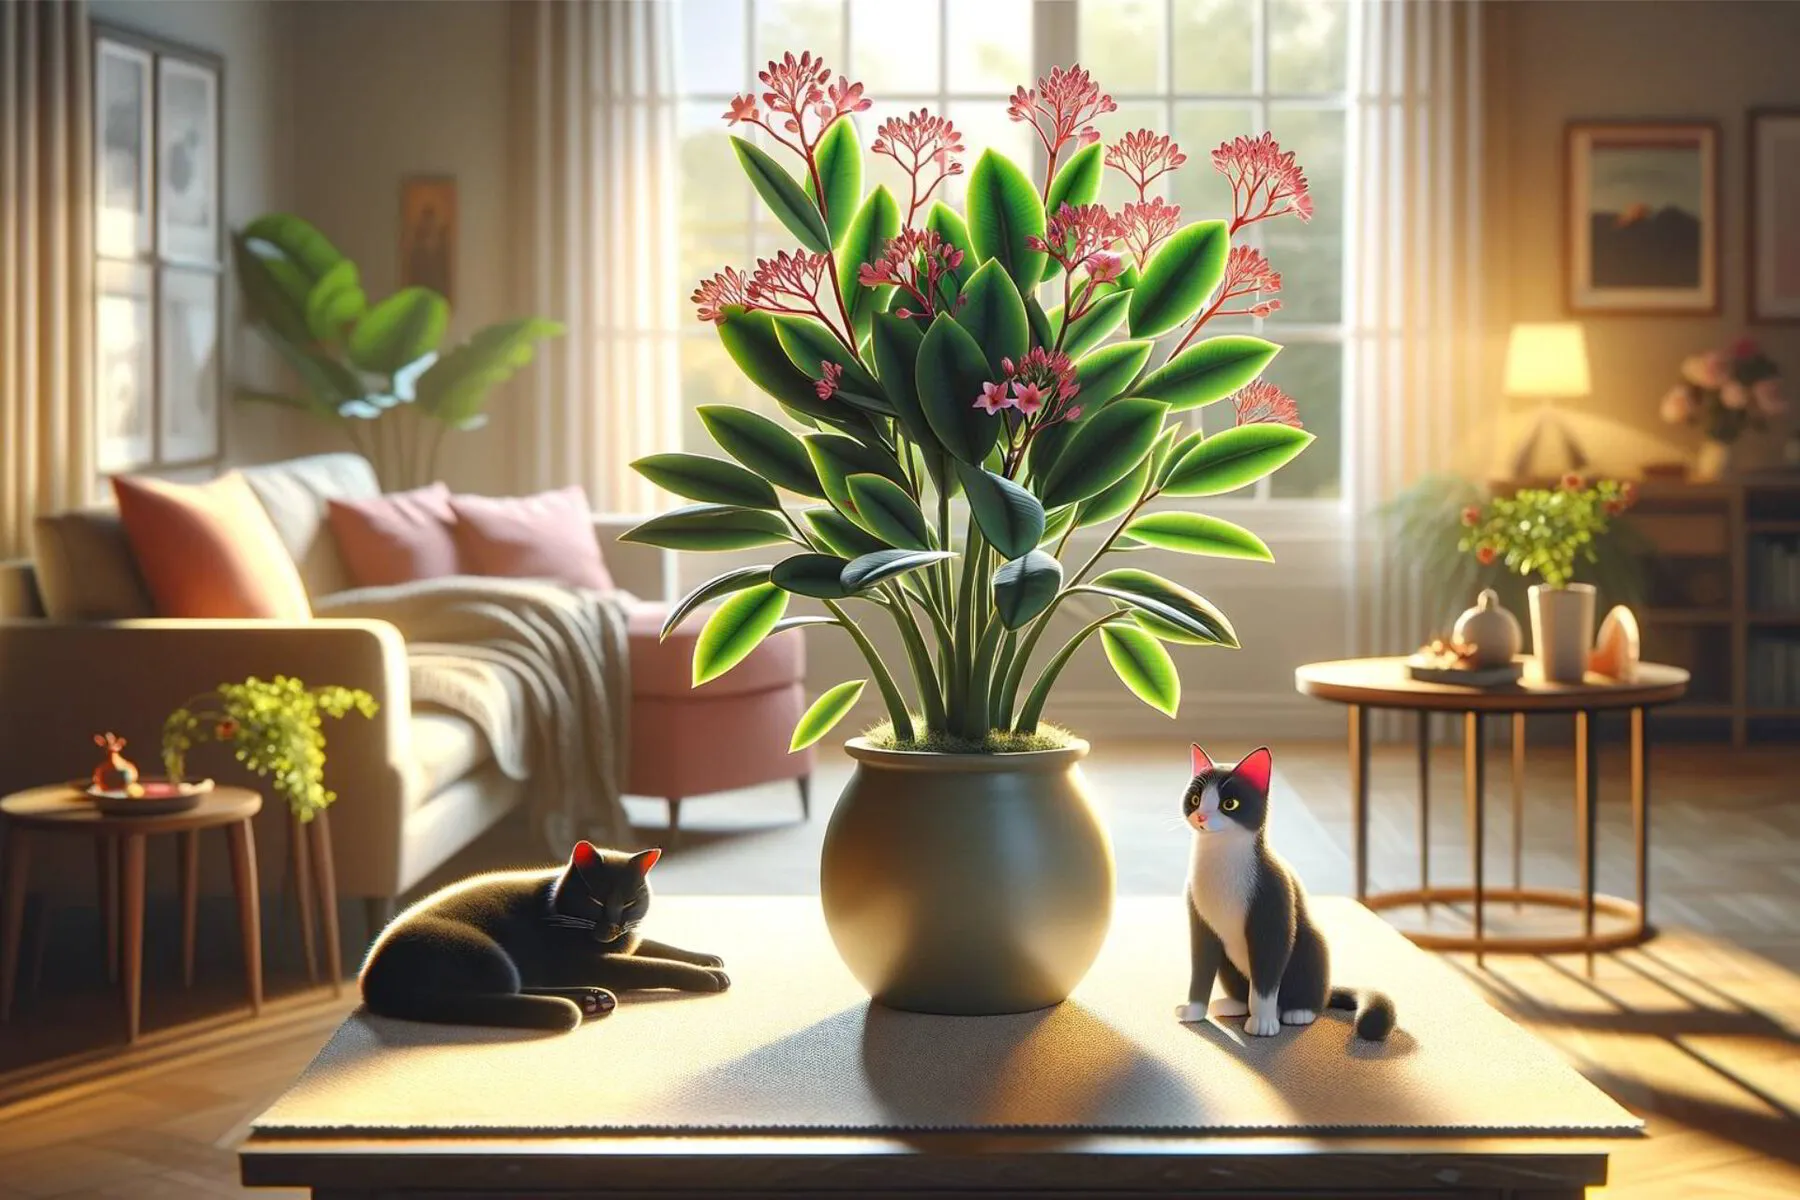 An indoor scene featuring a 'friendship plant' with soft leaves and vibrant pink buds, indicating its cat-friendly nature